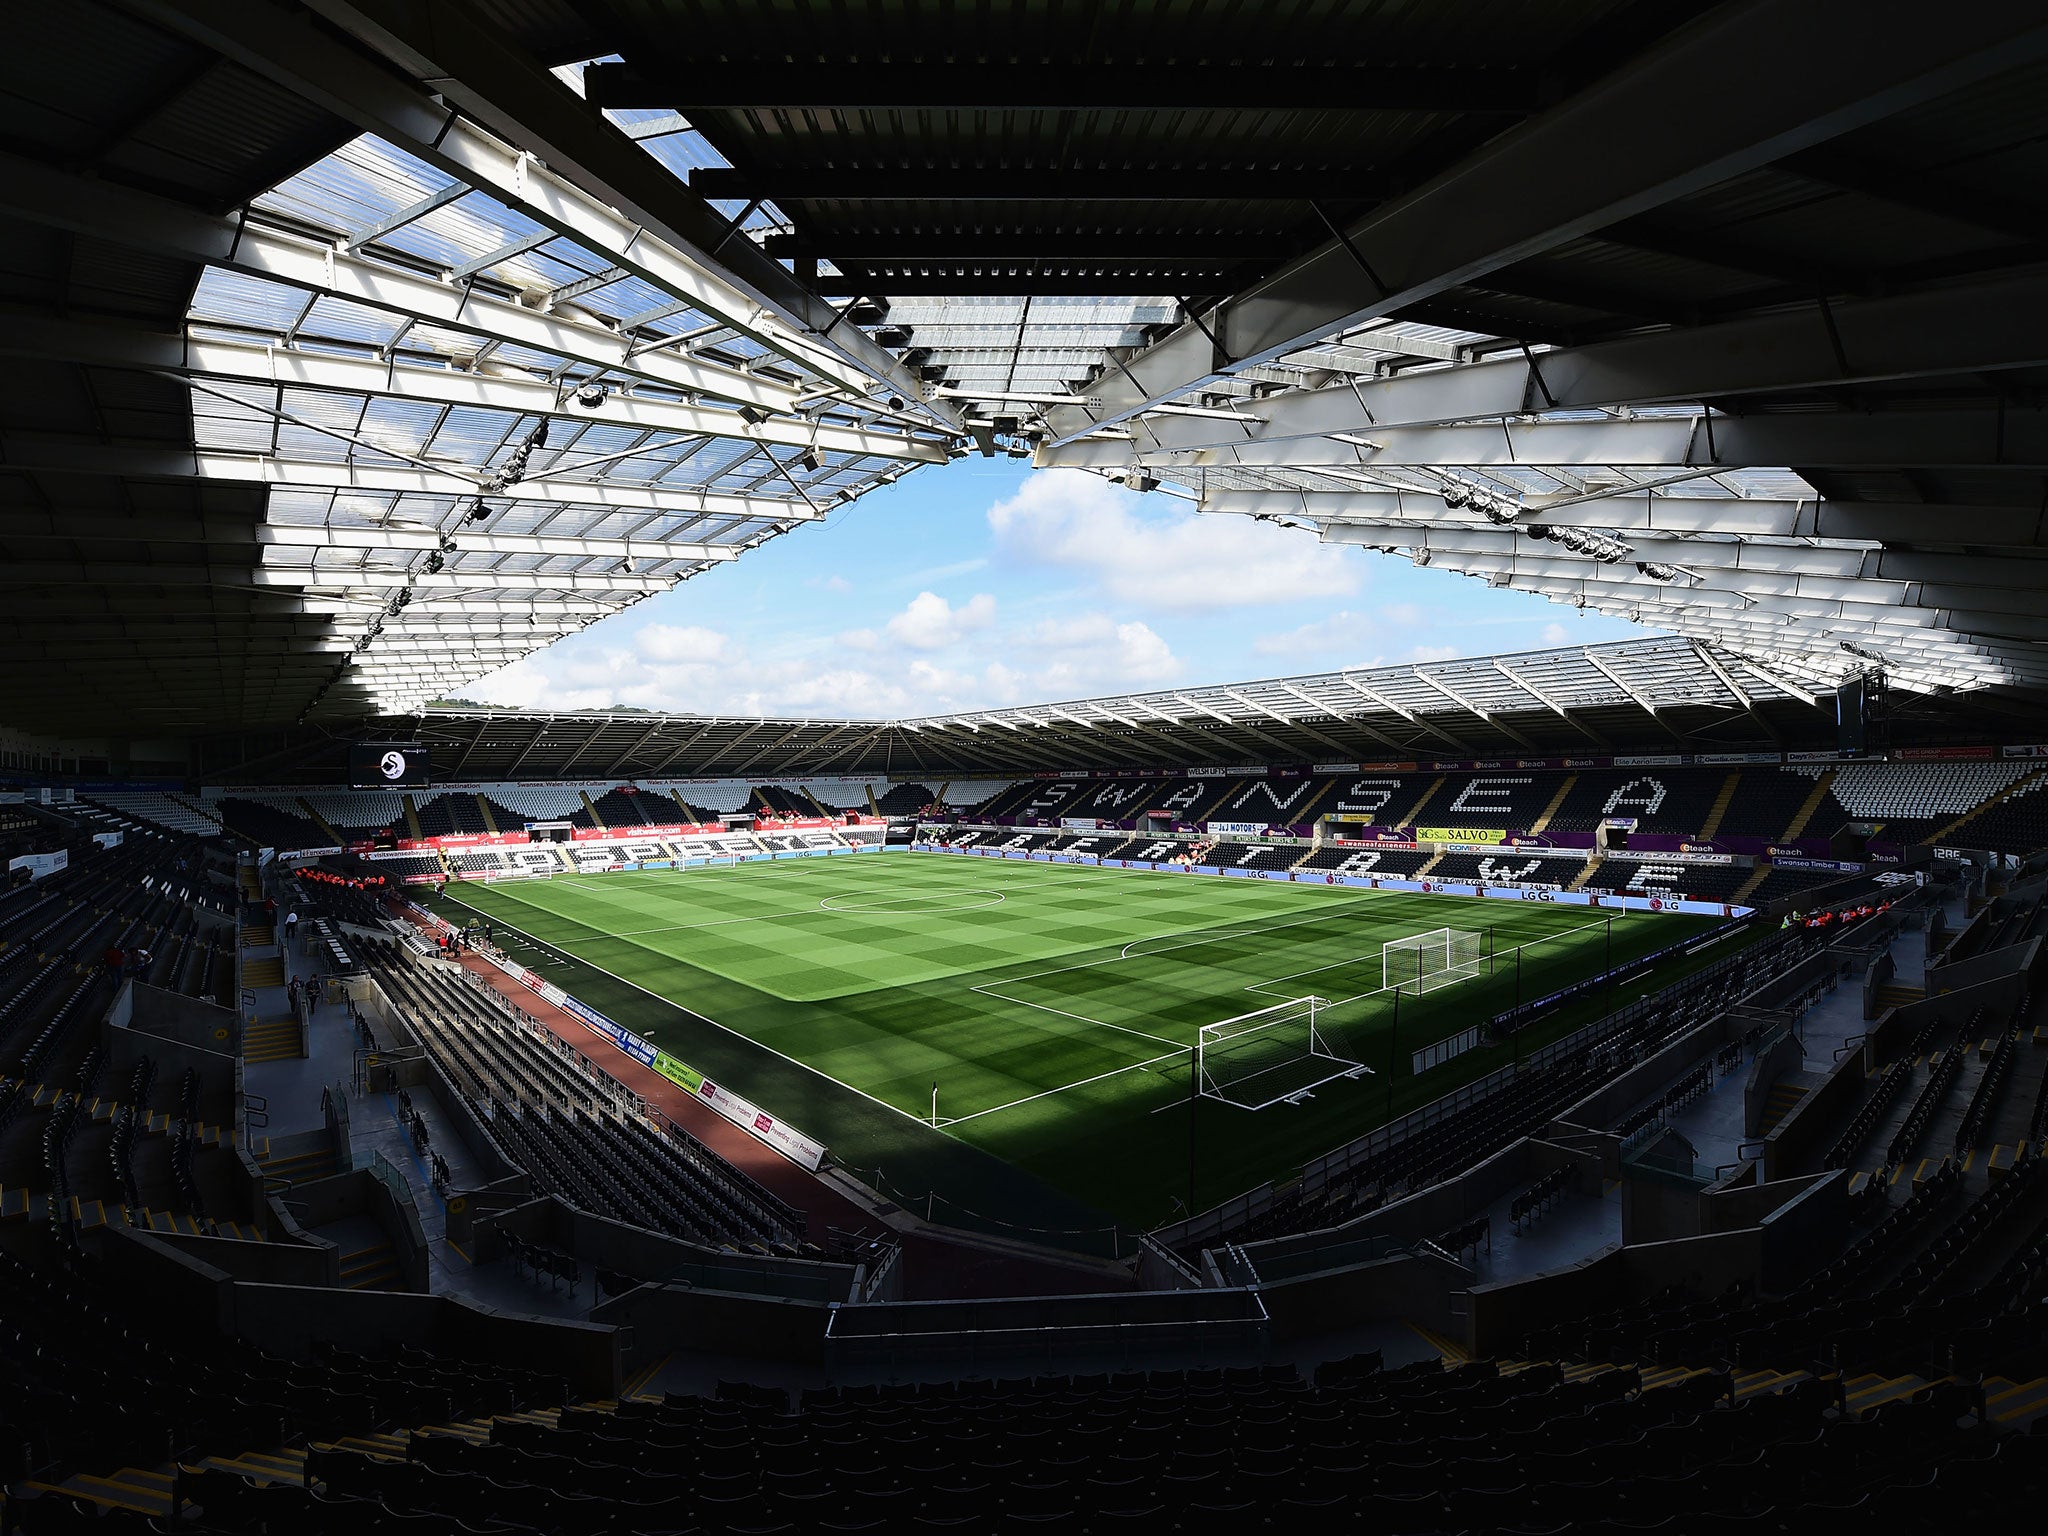 A view of the Liberty Stadium, home of Swansea City